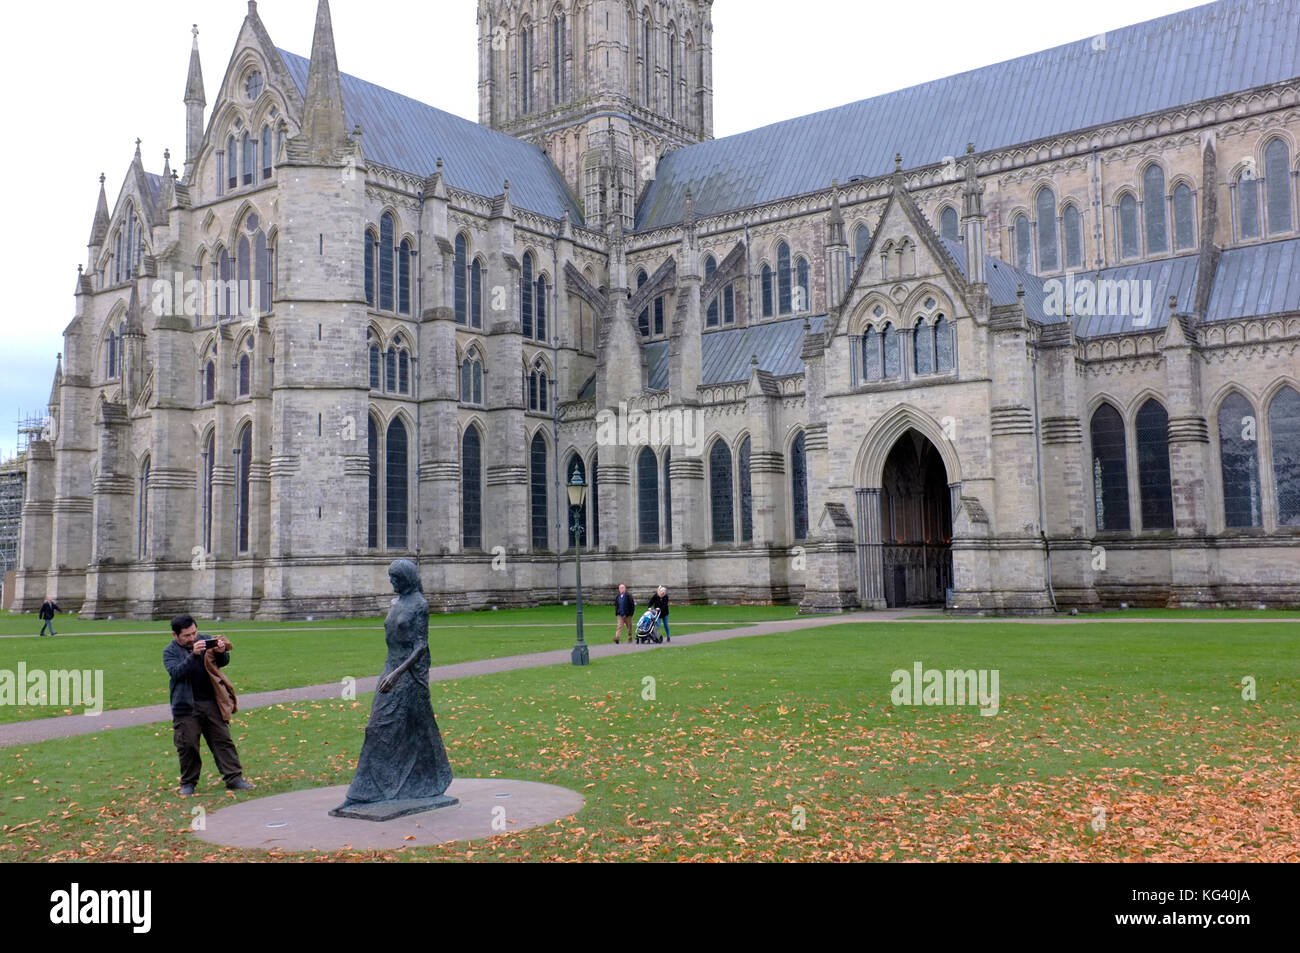 A tourist takes a photograph outside Salisbury Cathedral Stock Photo